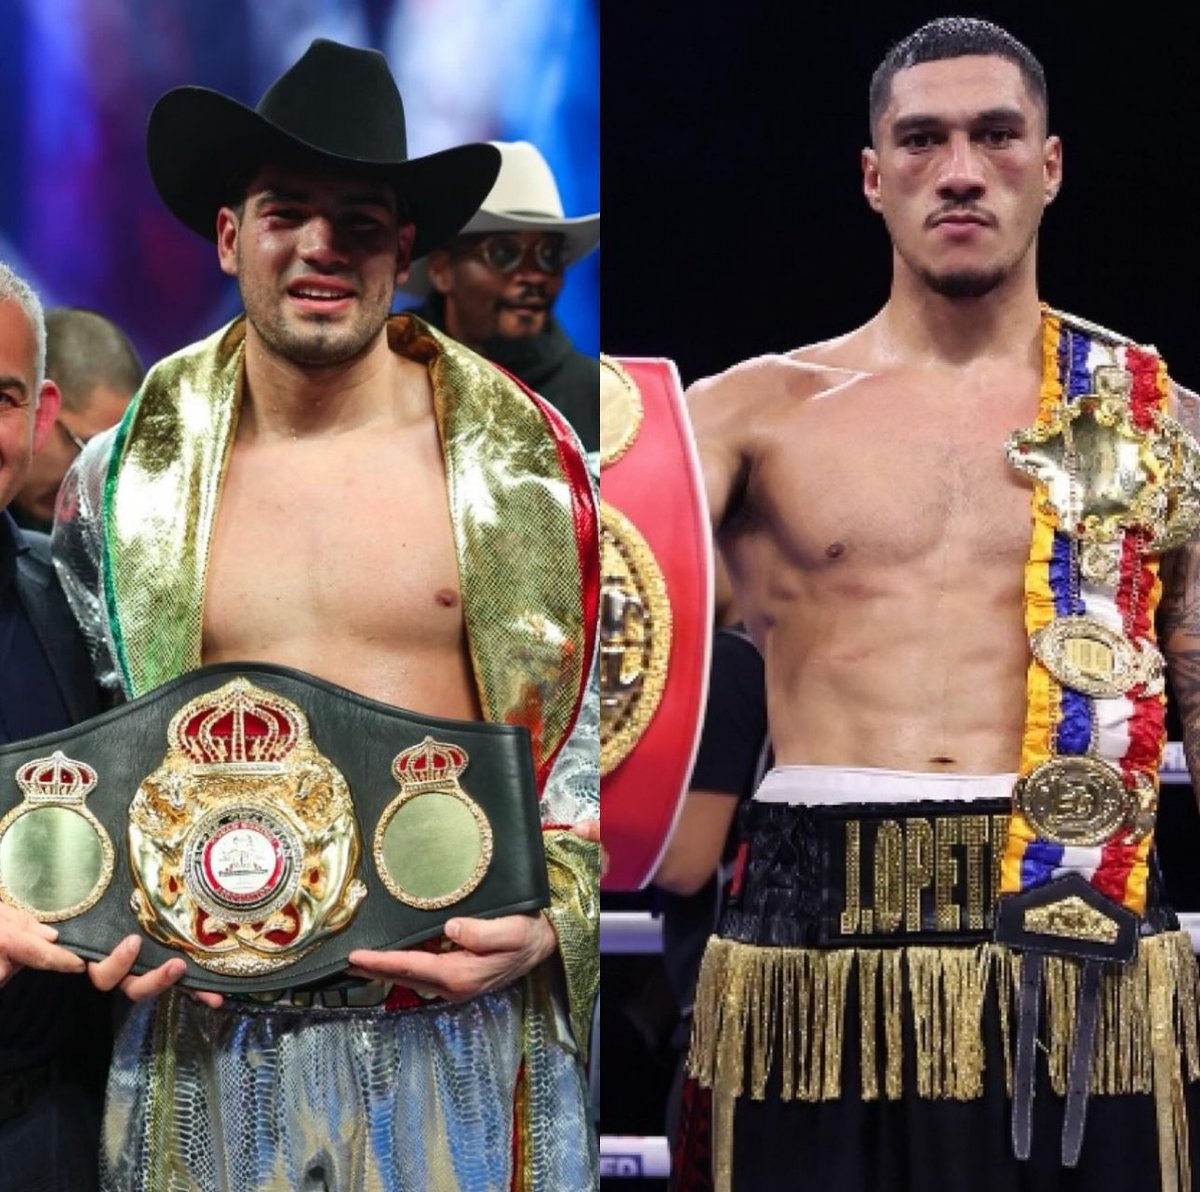 I Would love to see this matchup WBA Cruiserweight Champion Gilberto ‘Zurdo’ Ramirez 46-1-30 KO’s vs IBF & Ring Cruiserweight Champion Jai Opetaia 25-0-19 KO’s #ramirezopetaia #mexicanboxing #australianboxing #goldenboypromotions #matchroomboxing #wbaboxing #ibfboxing